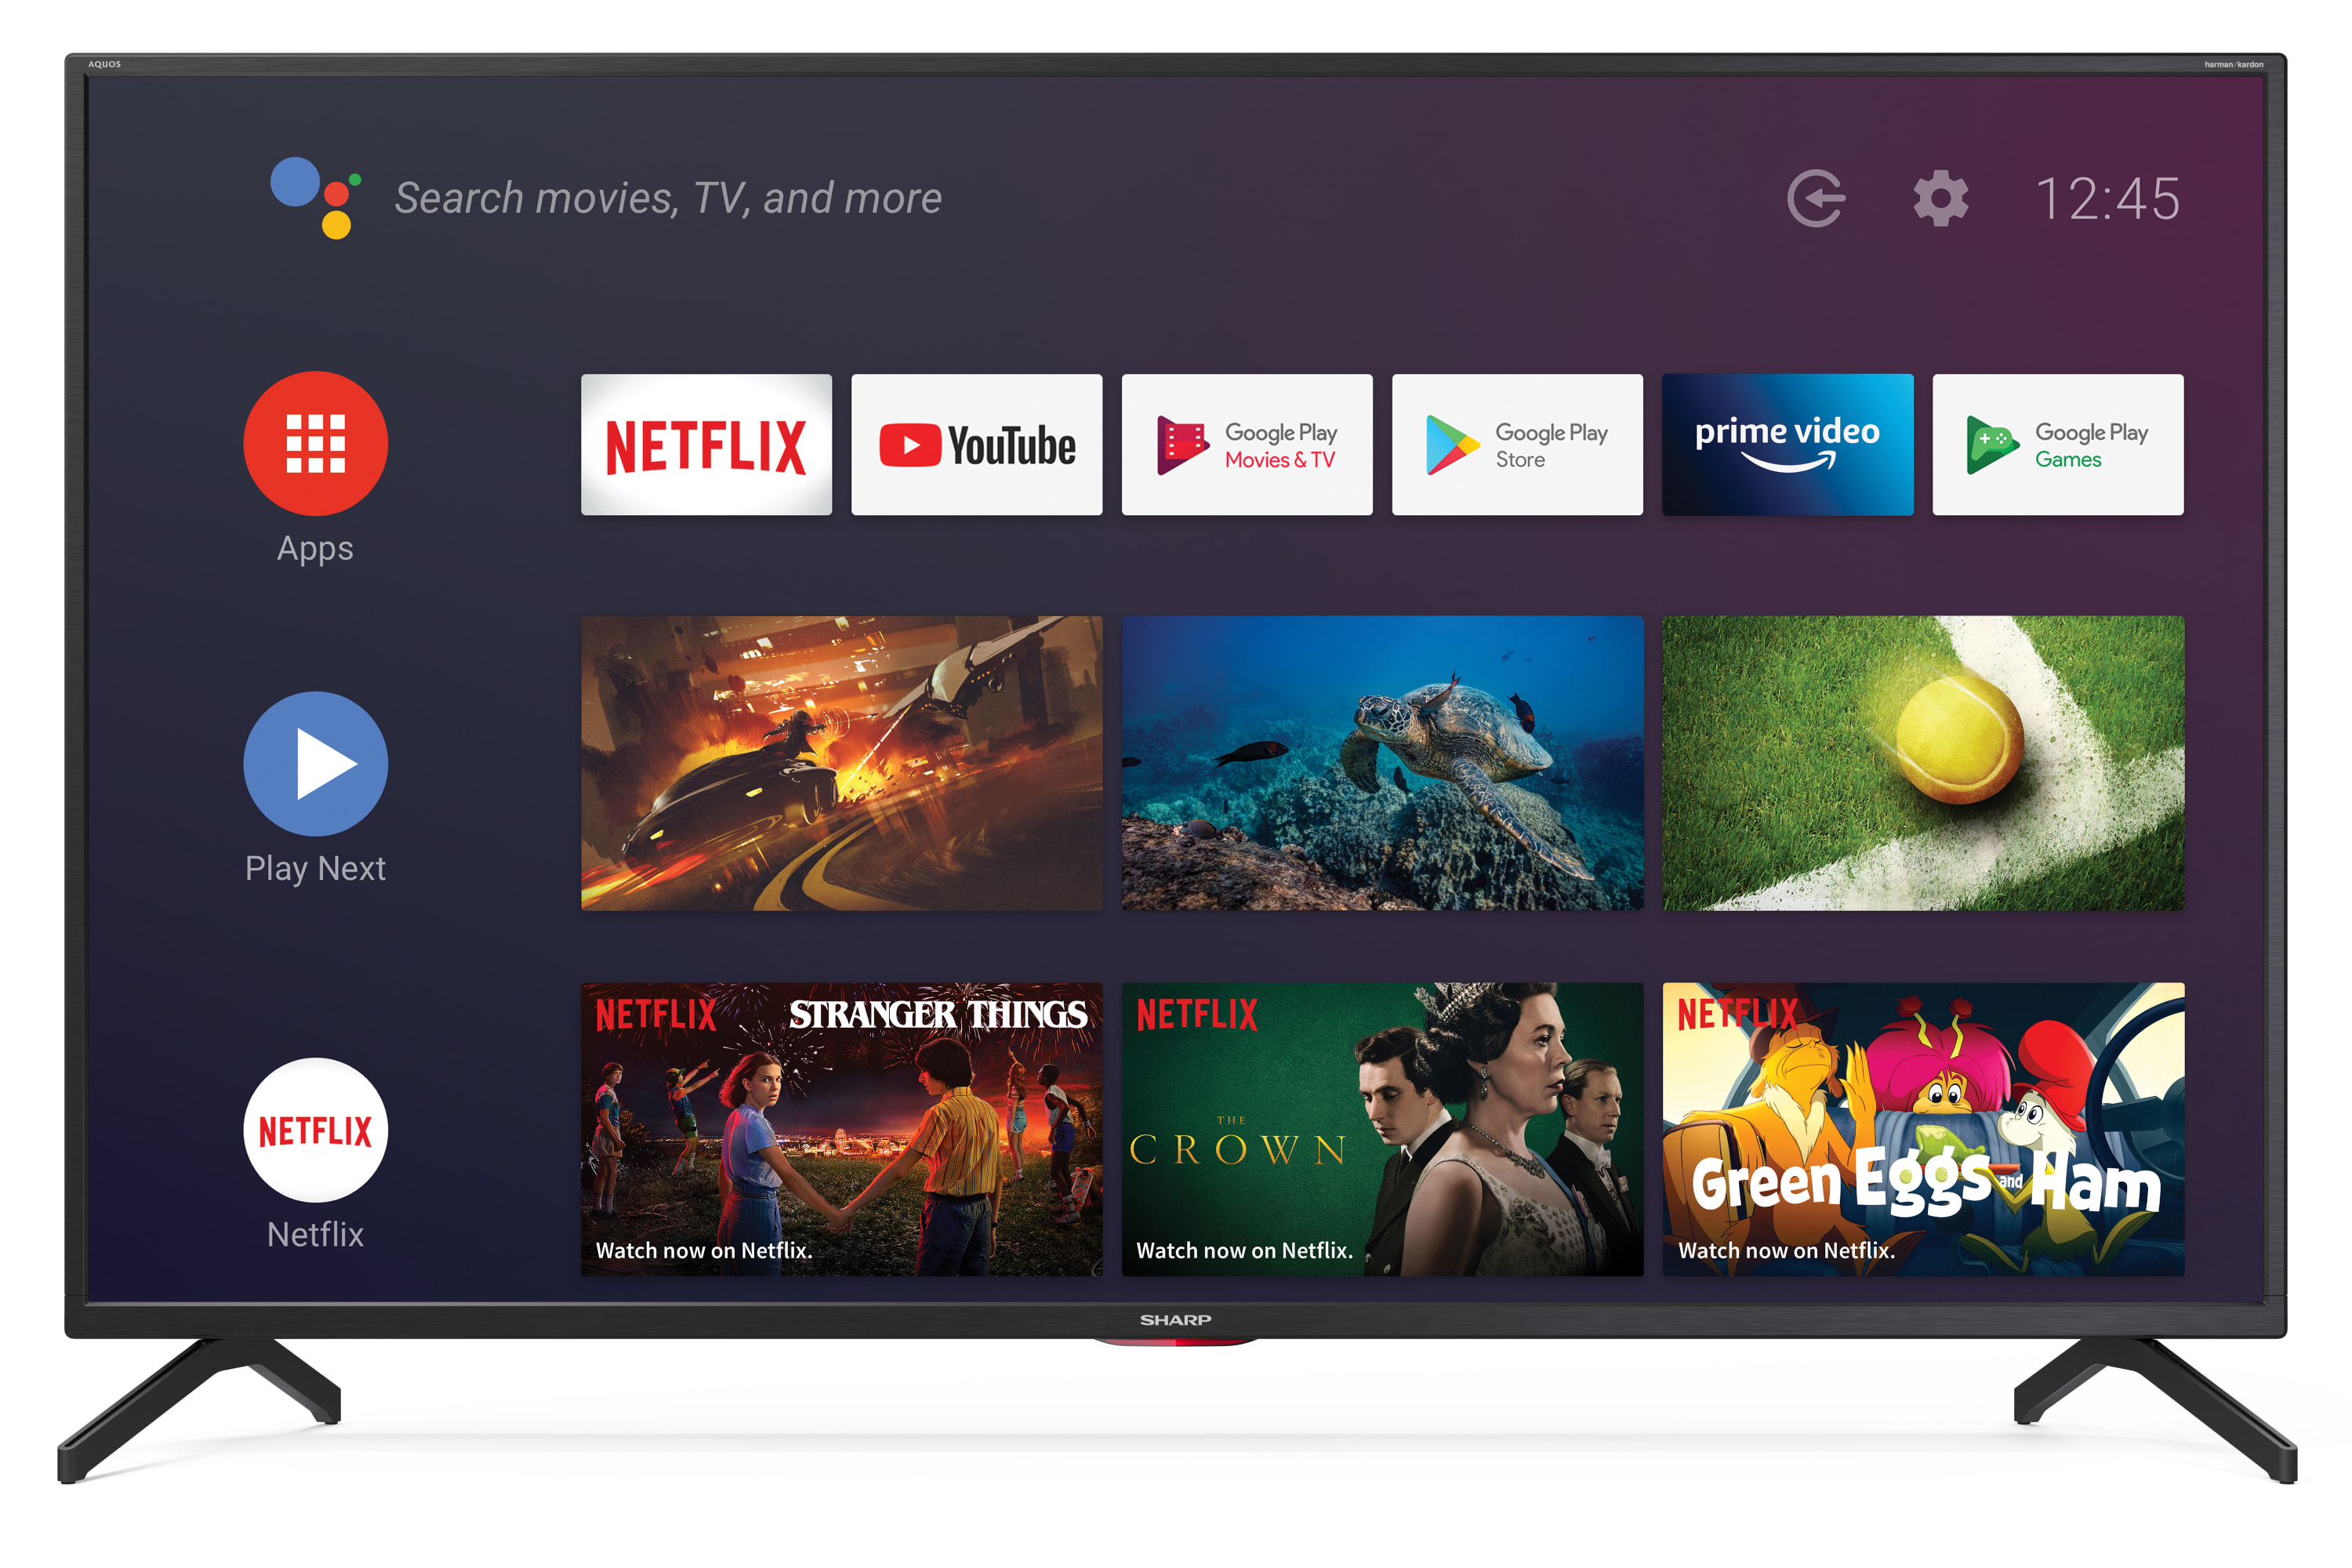 Android TV 4K UHD - ANDROID TV™ 4K ULTRA HD de 55 pol.